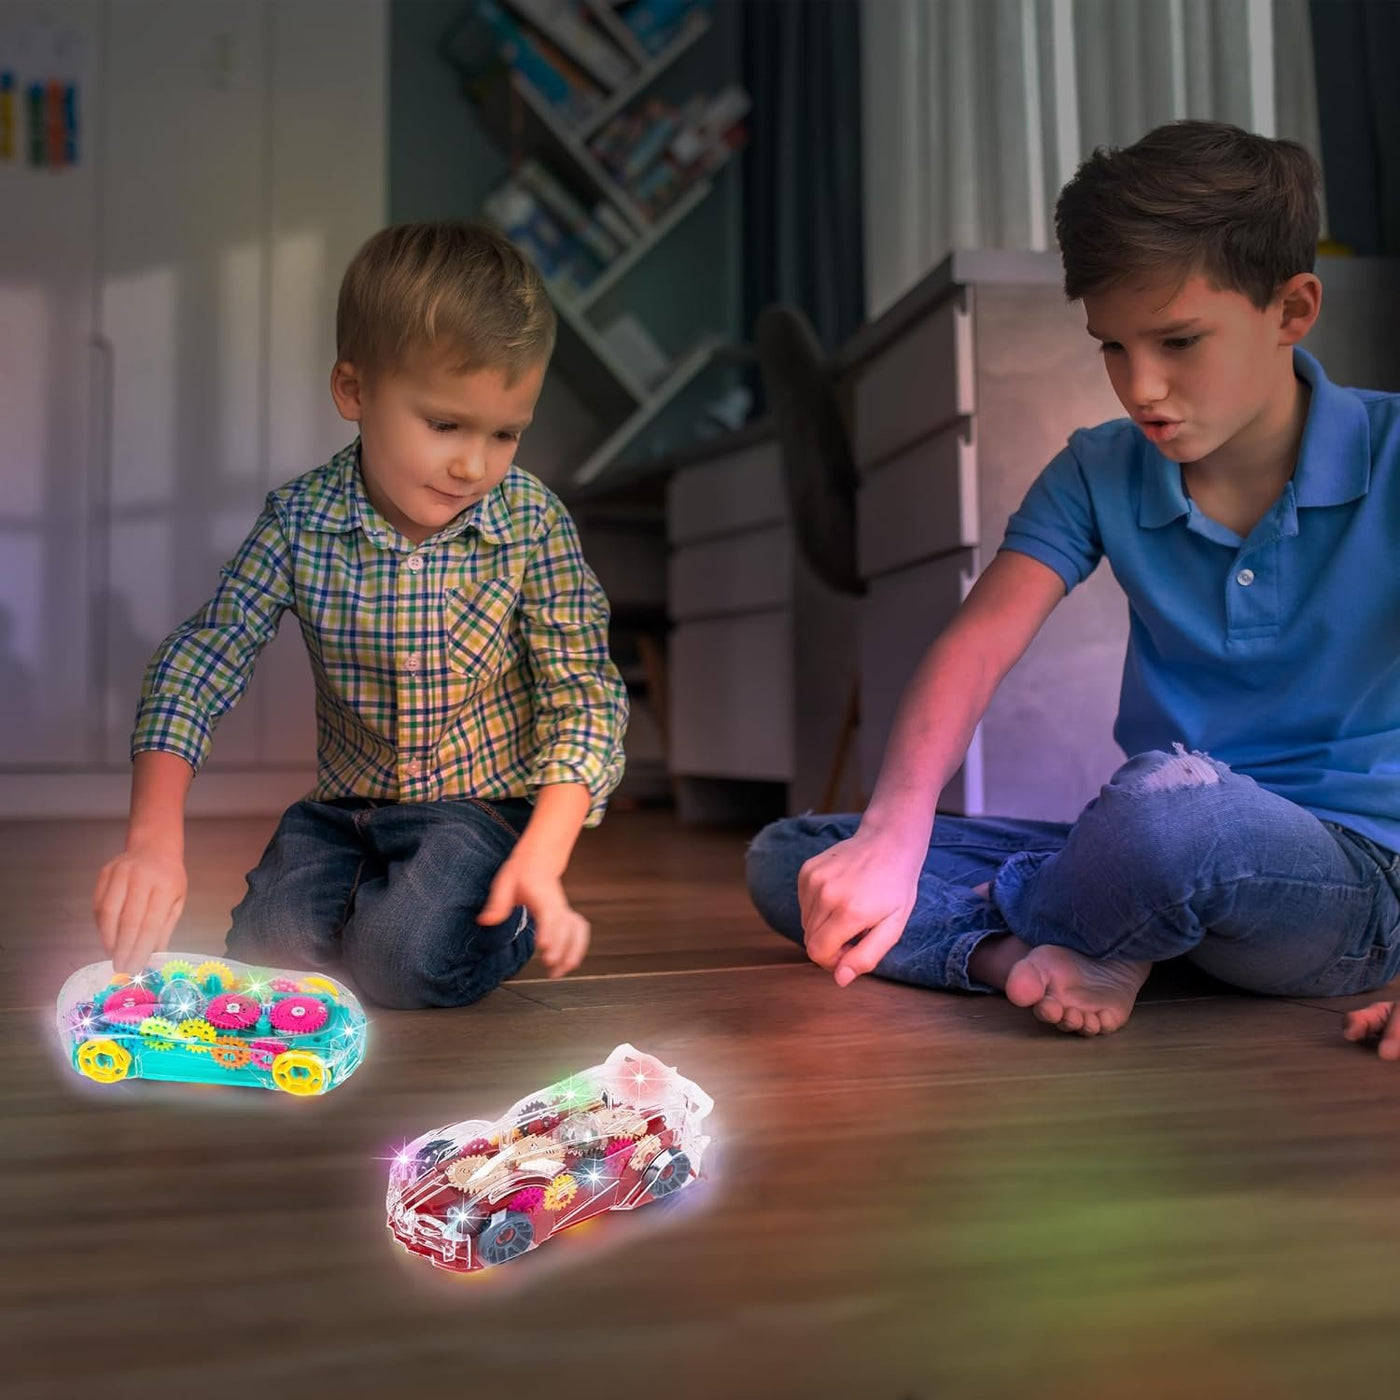 Light Up Transparent Toy Cars for Kids, Set of 2, Bump and Go Toy Cars with Colorful Moving Gears, Music, and LED Effects, Fun Educational Toy for Kids, Great Birthday Gift Idea